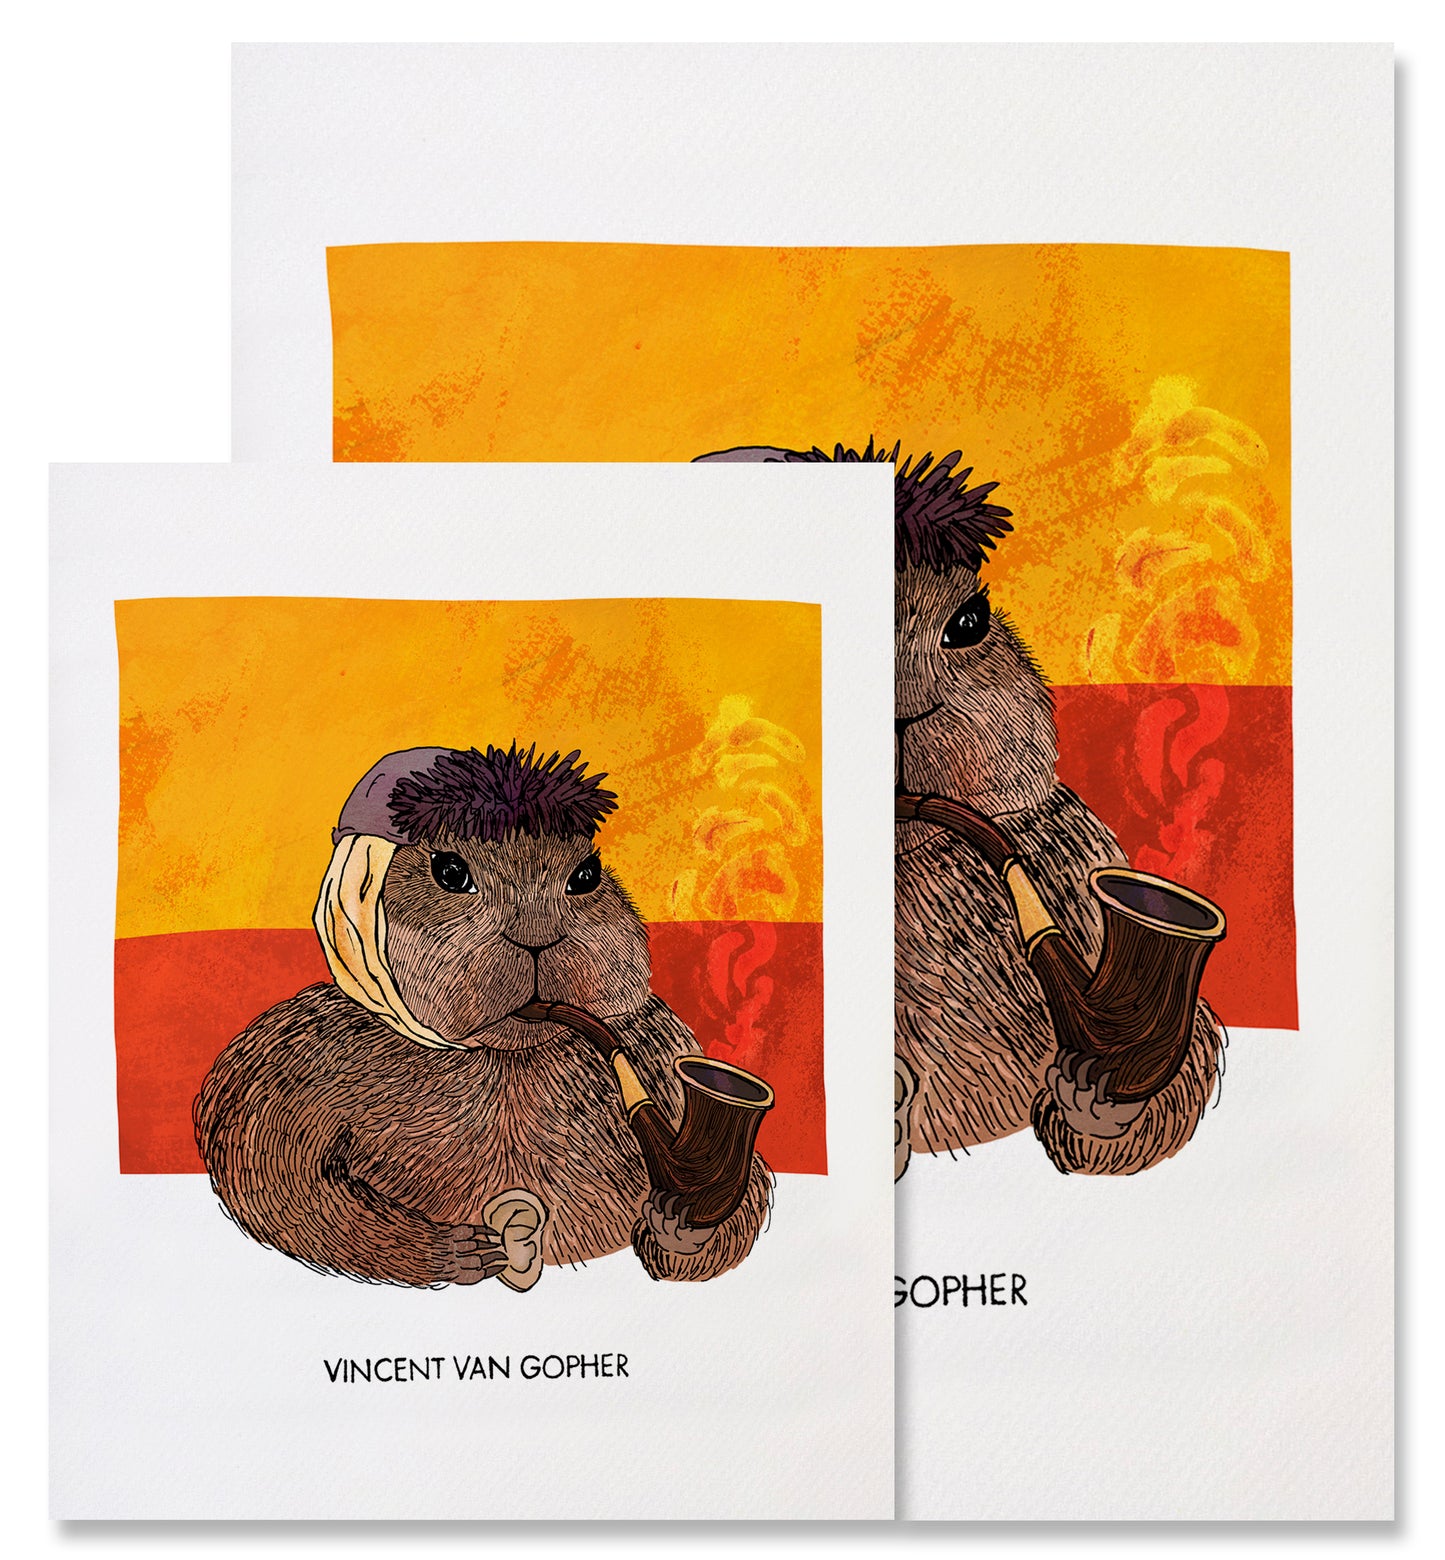 This image shows the two different sizes available for the Vincent van Gopher print - 8x10in and 11x14in. The Vincent van Gopher fine art print depicts Vincent van Gogh as a gopher. The gopher is facing the right, wearing a grey blue winter hat, and has a bandaged ear. He is holding a wooden smoking pipe in his left paw with hints of smoke coming up and holding a human ear in his right paw, a nod to van Gogh cutting off his ear. The background has two horizontal blocks of swirly colors, yellow on top of red